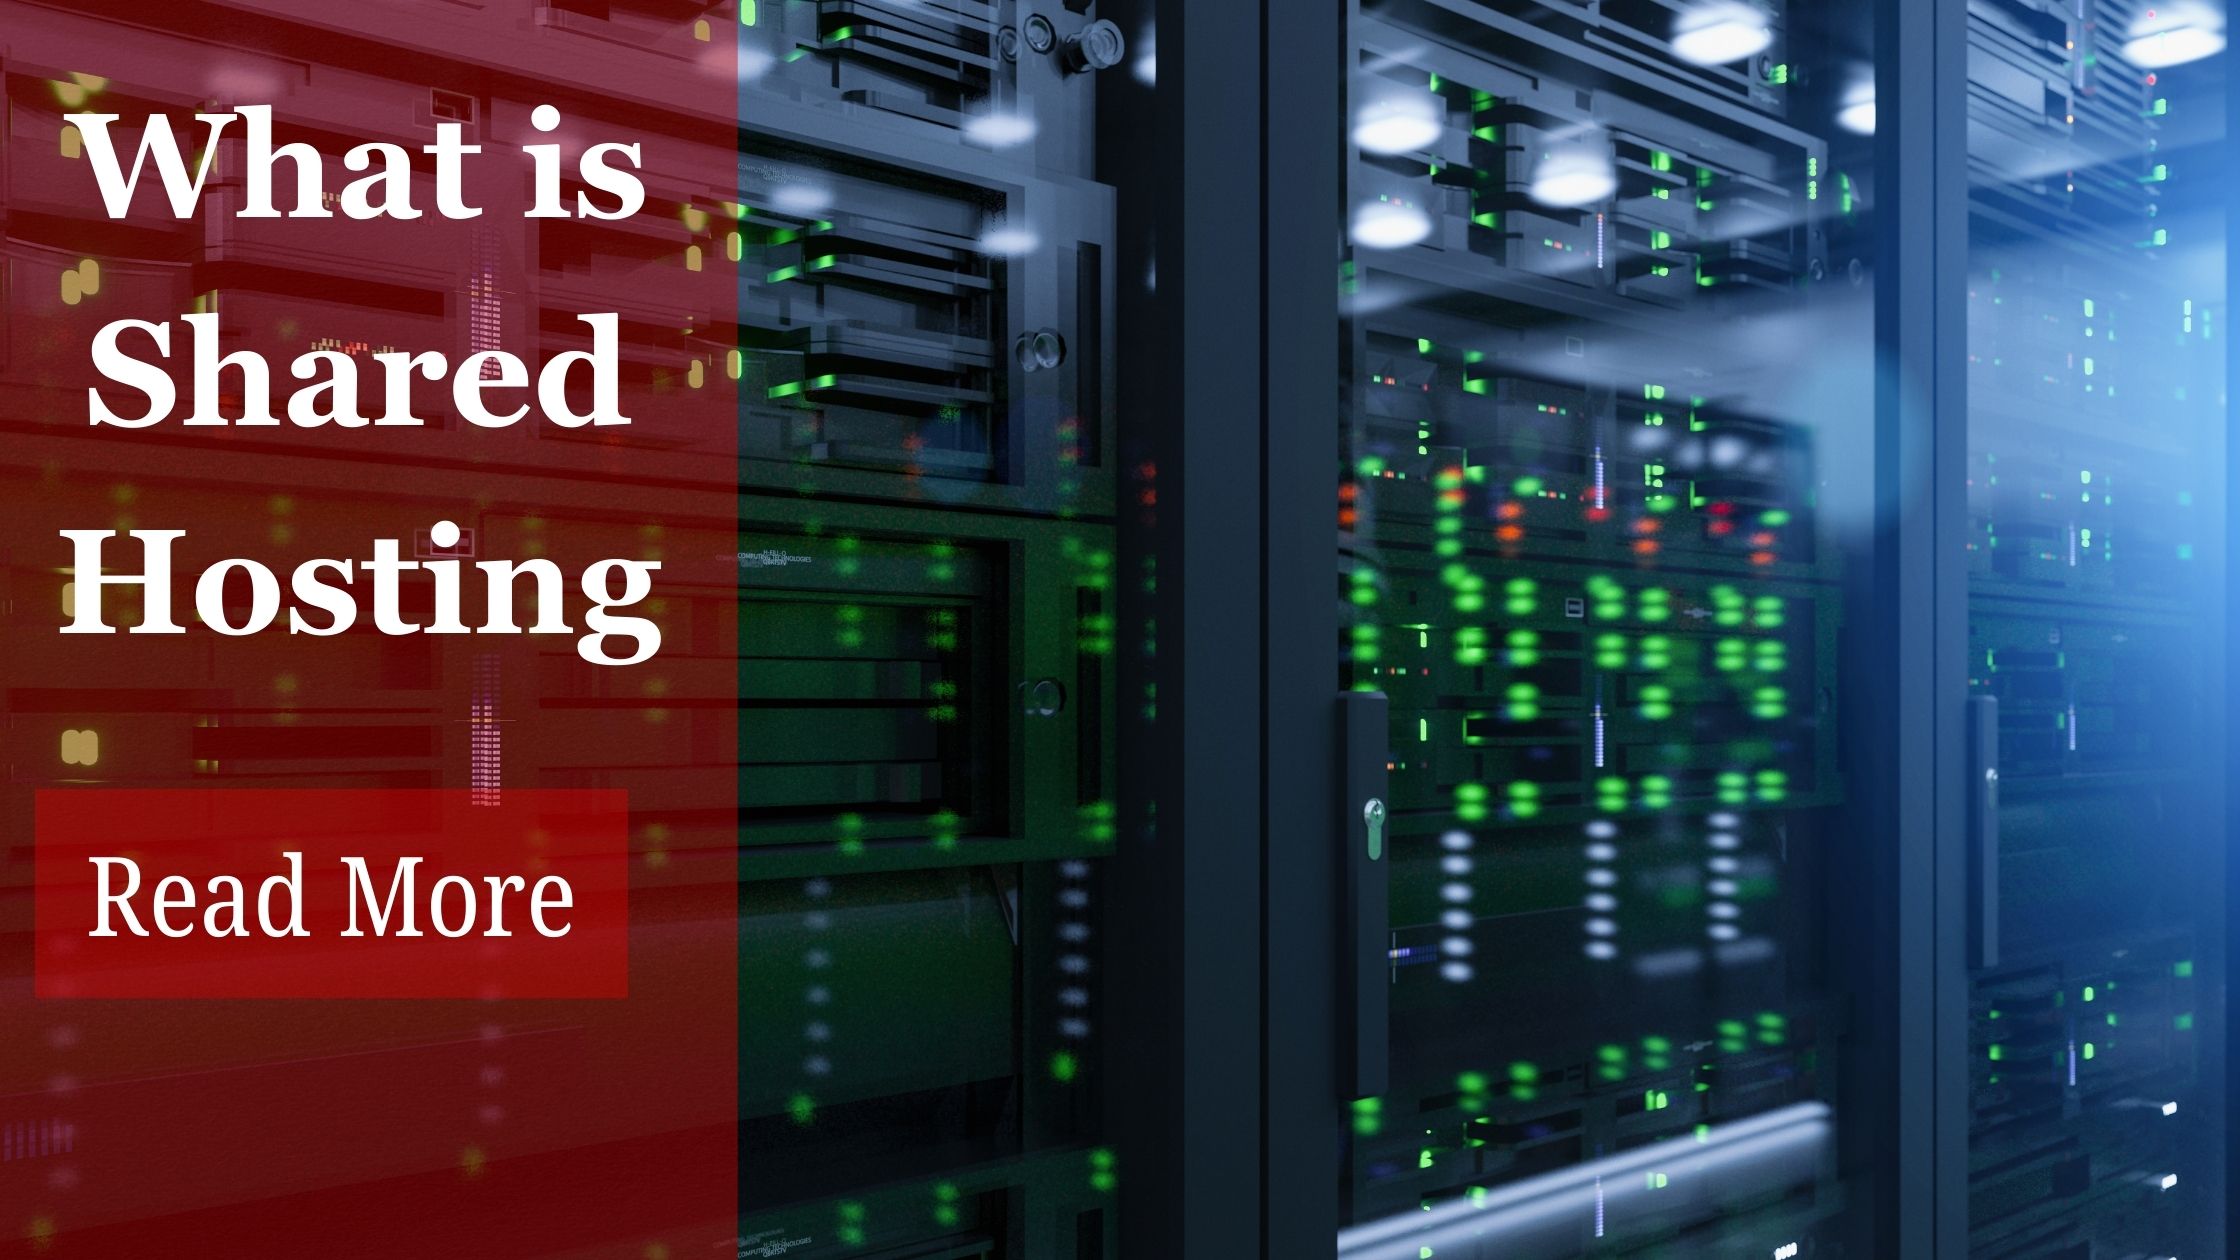 Find reliable and affordable shared hosting in India. Discover top providers like Hostingbuzz for optimal performance and security.